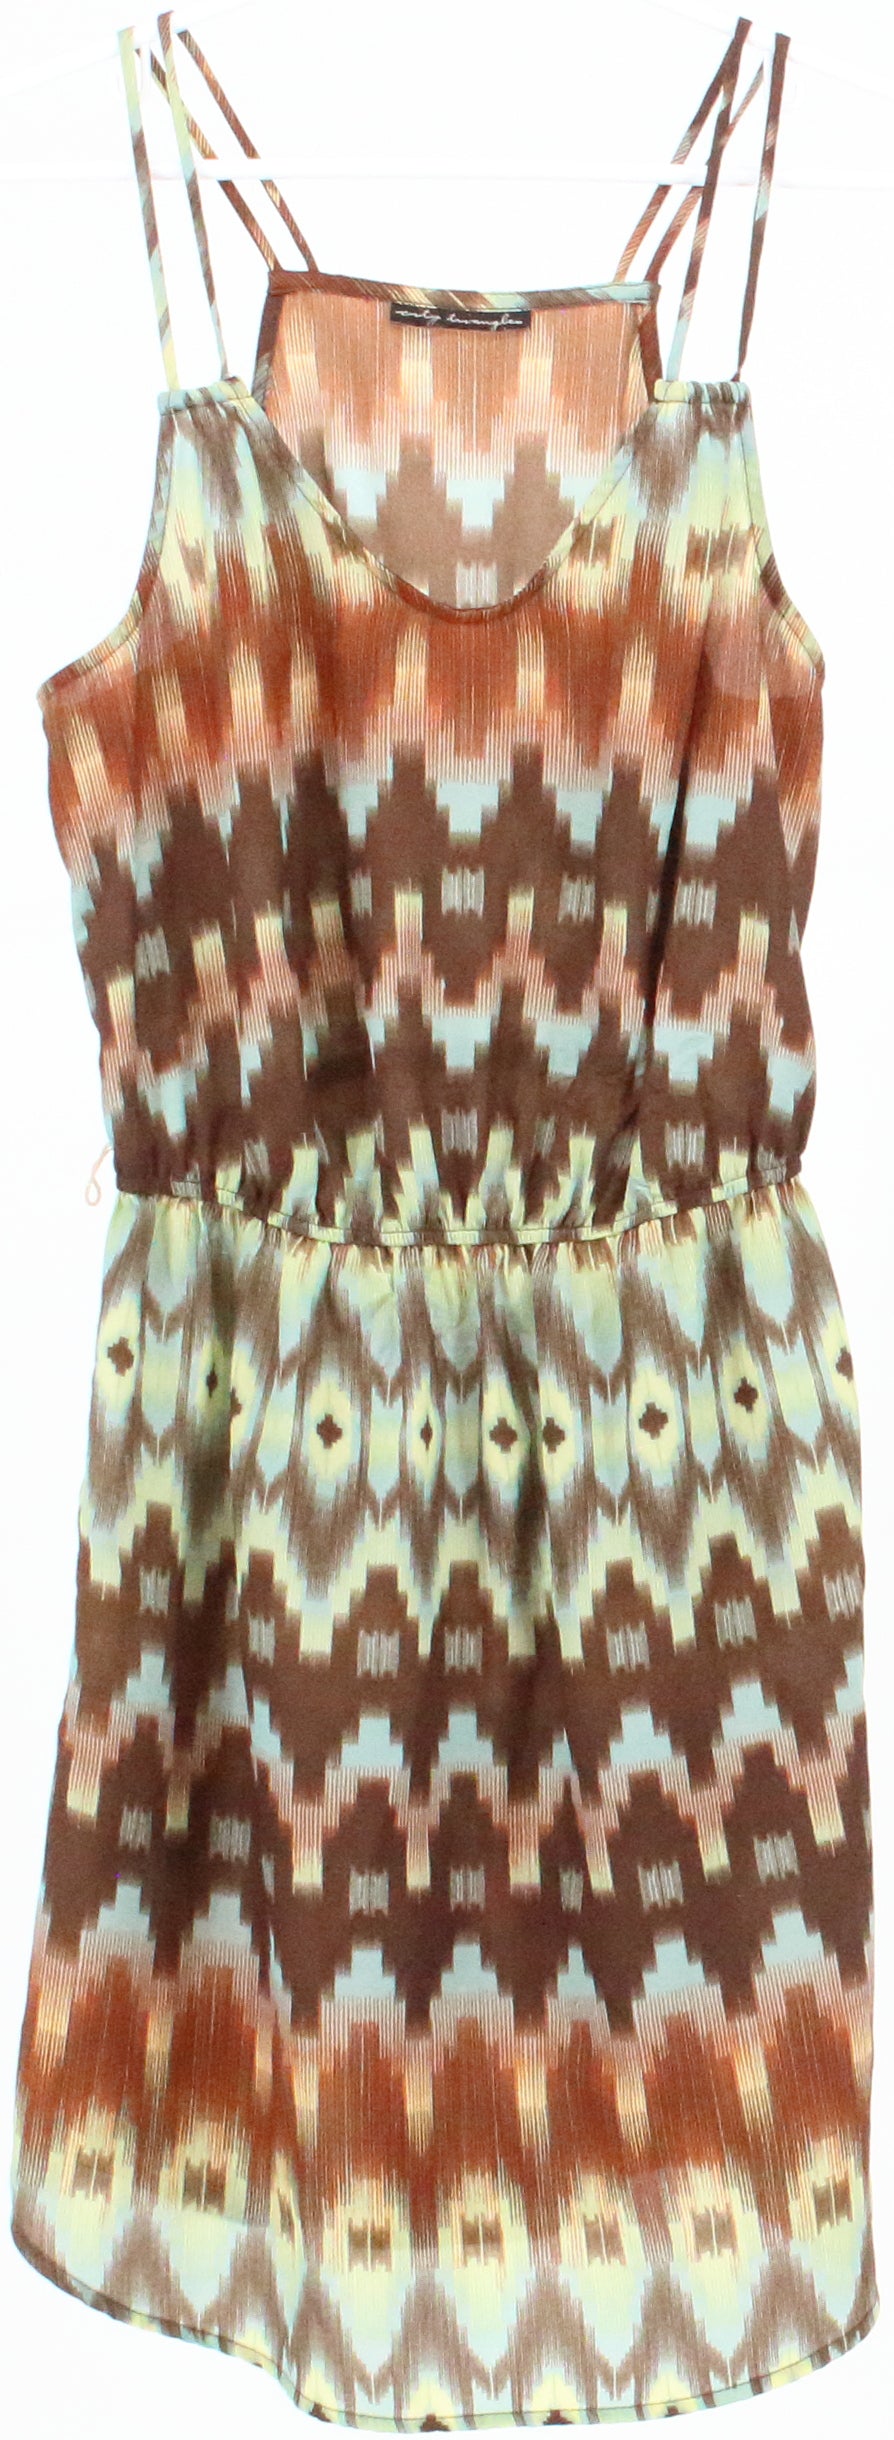 Shop City Triangles Brown and Green Print Short Dress